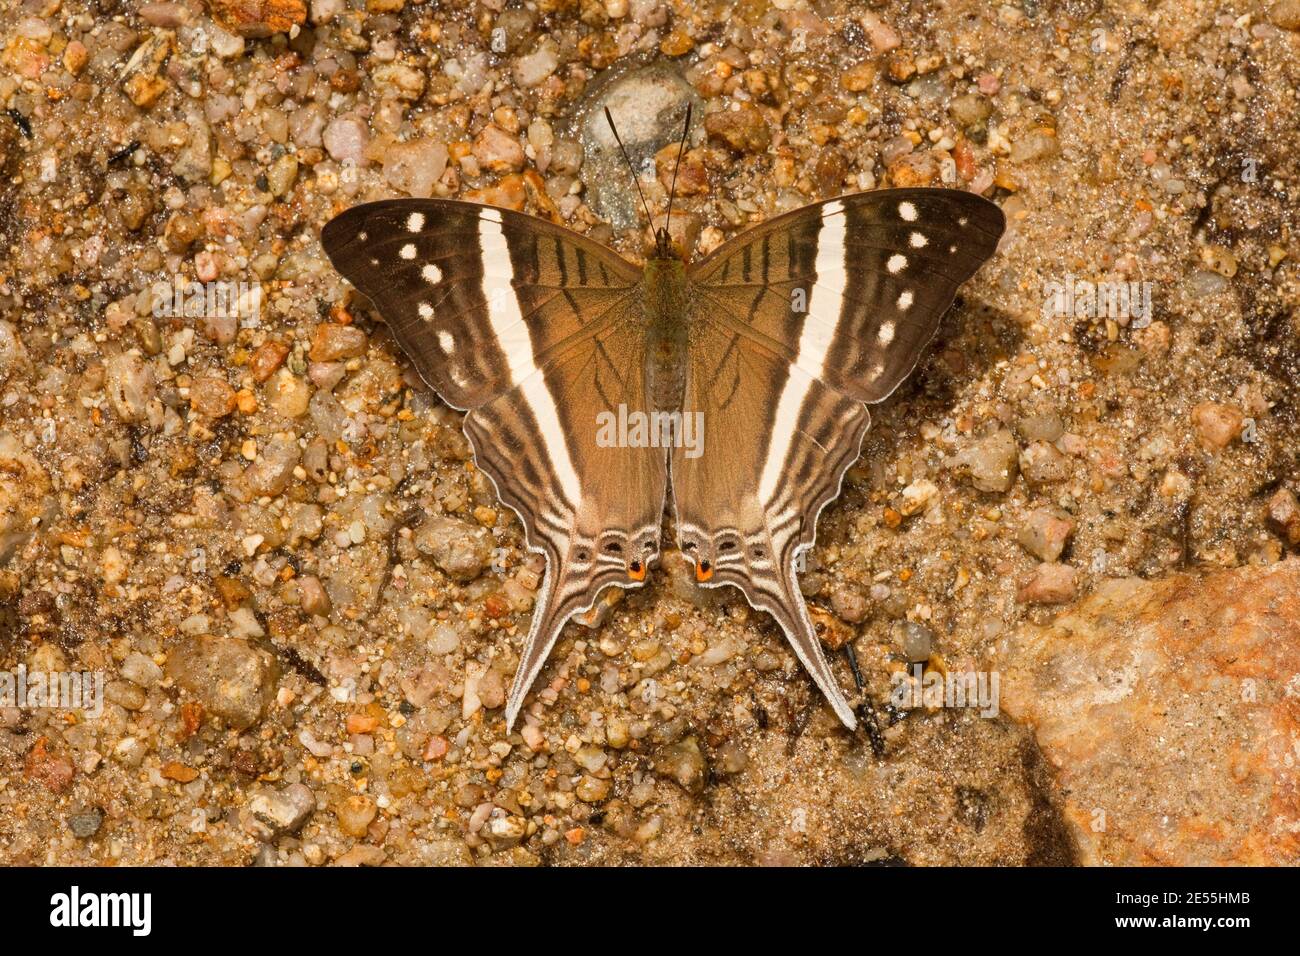 White-banded Daggerwing Butterfly, Marpesia crethon, Nymphalidae. Dorsal view. Stock Photo